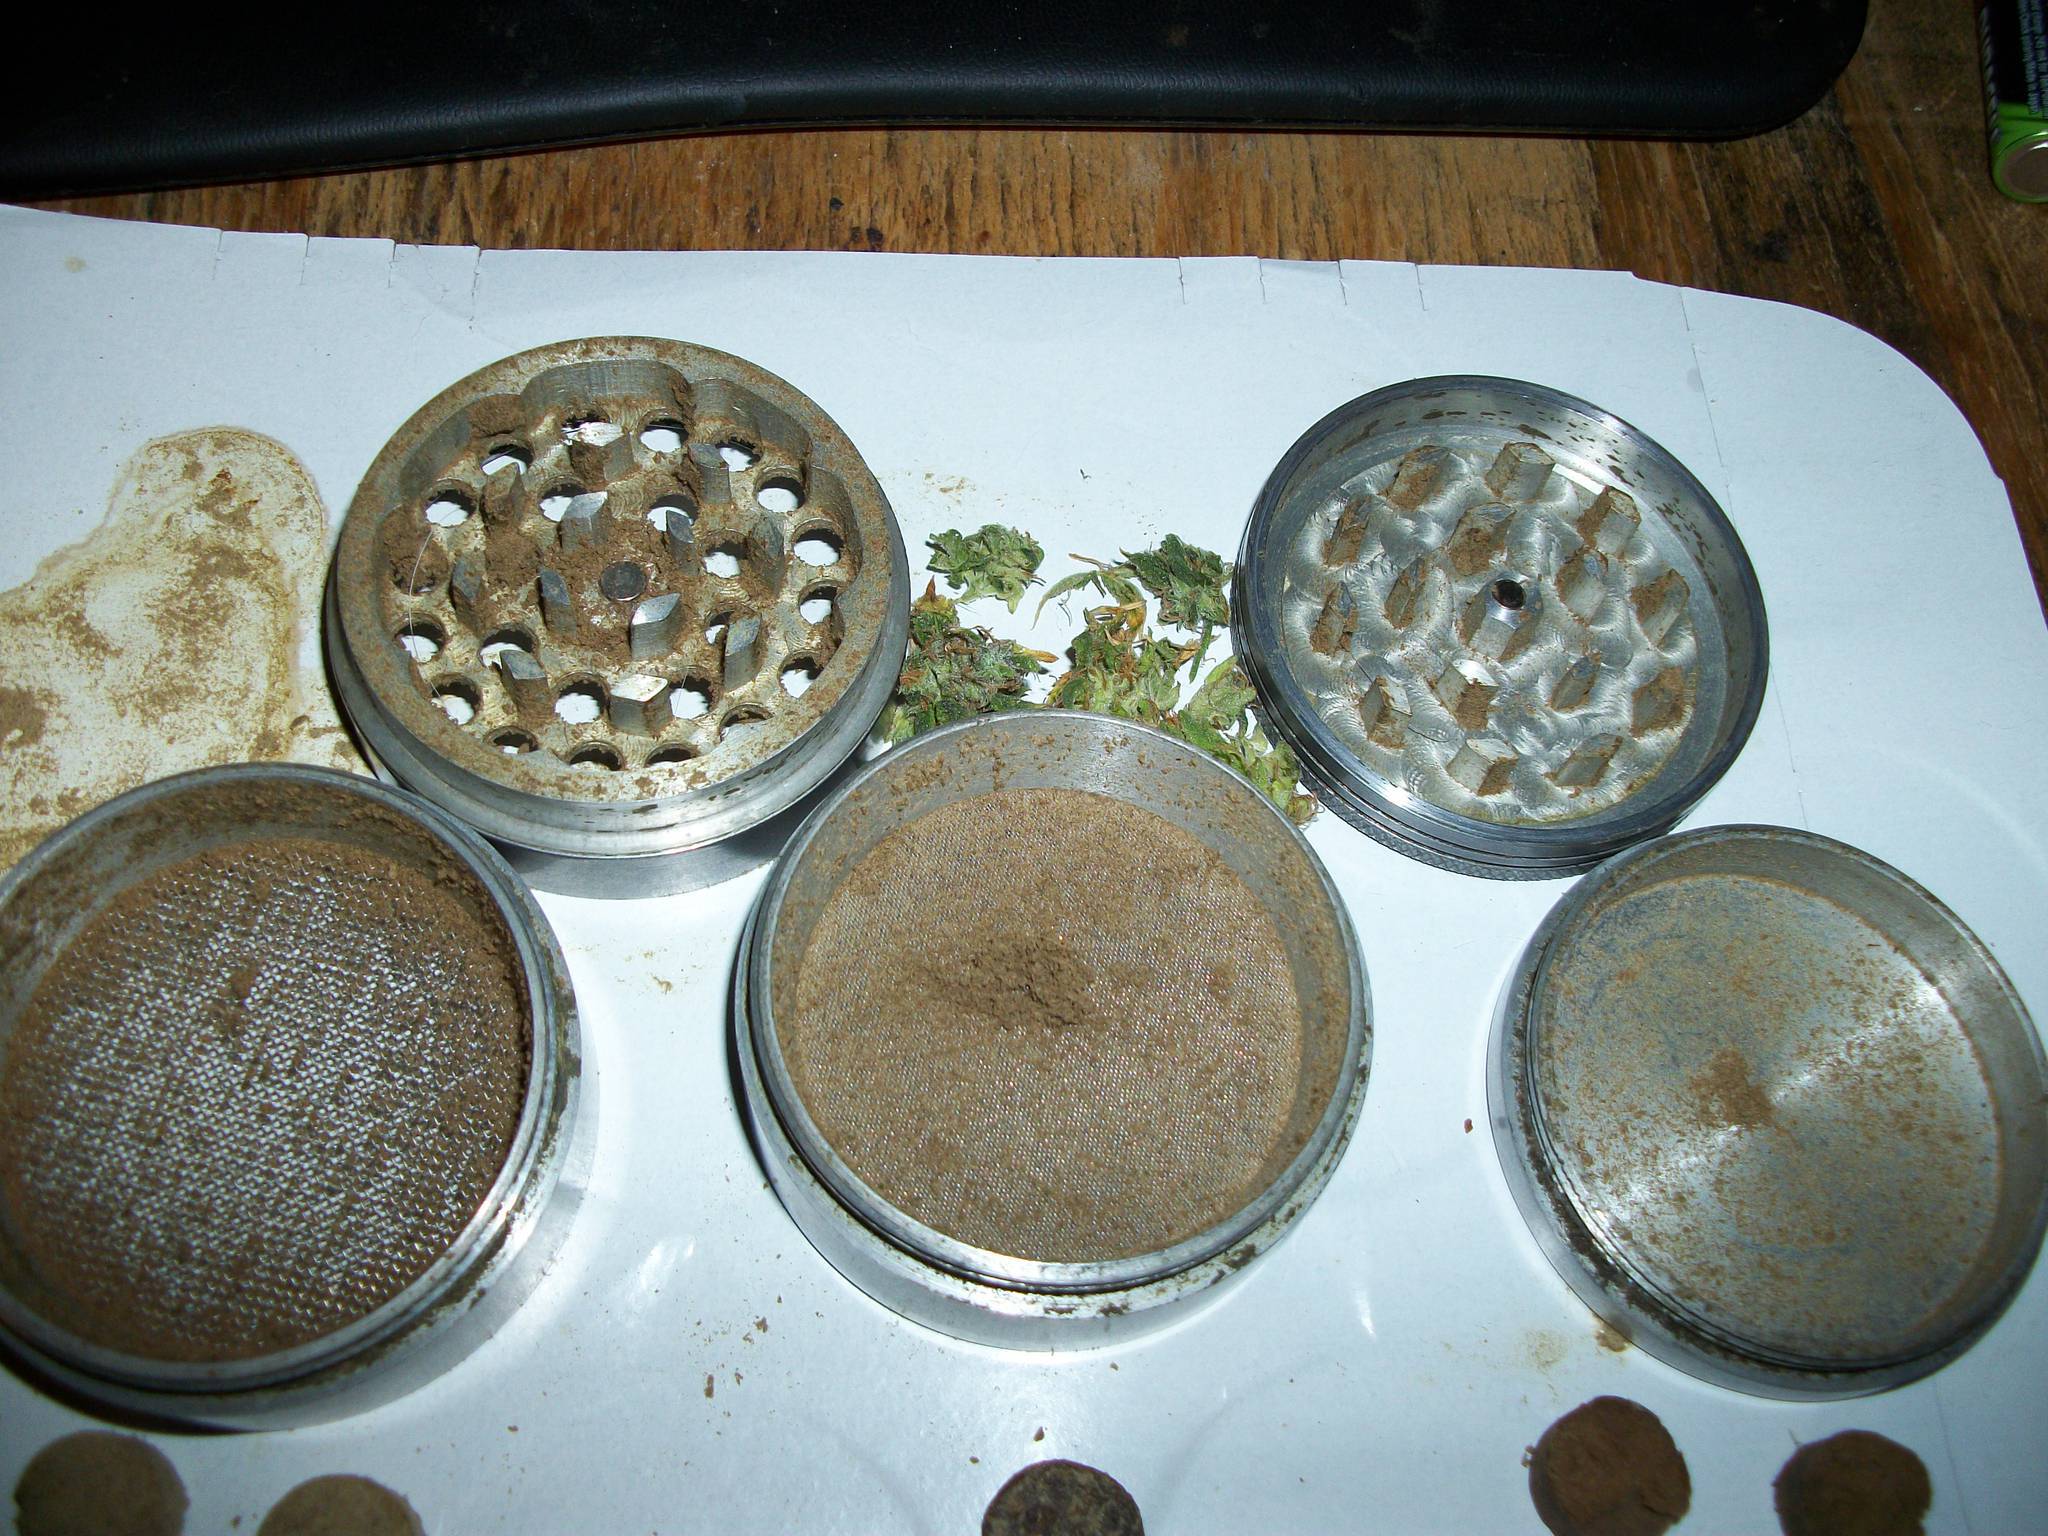 grinders for weed with kief catcher